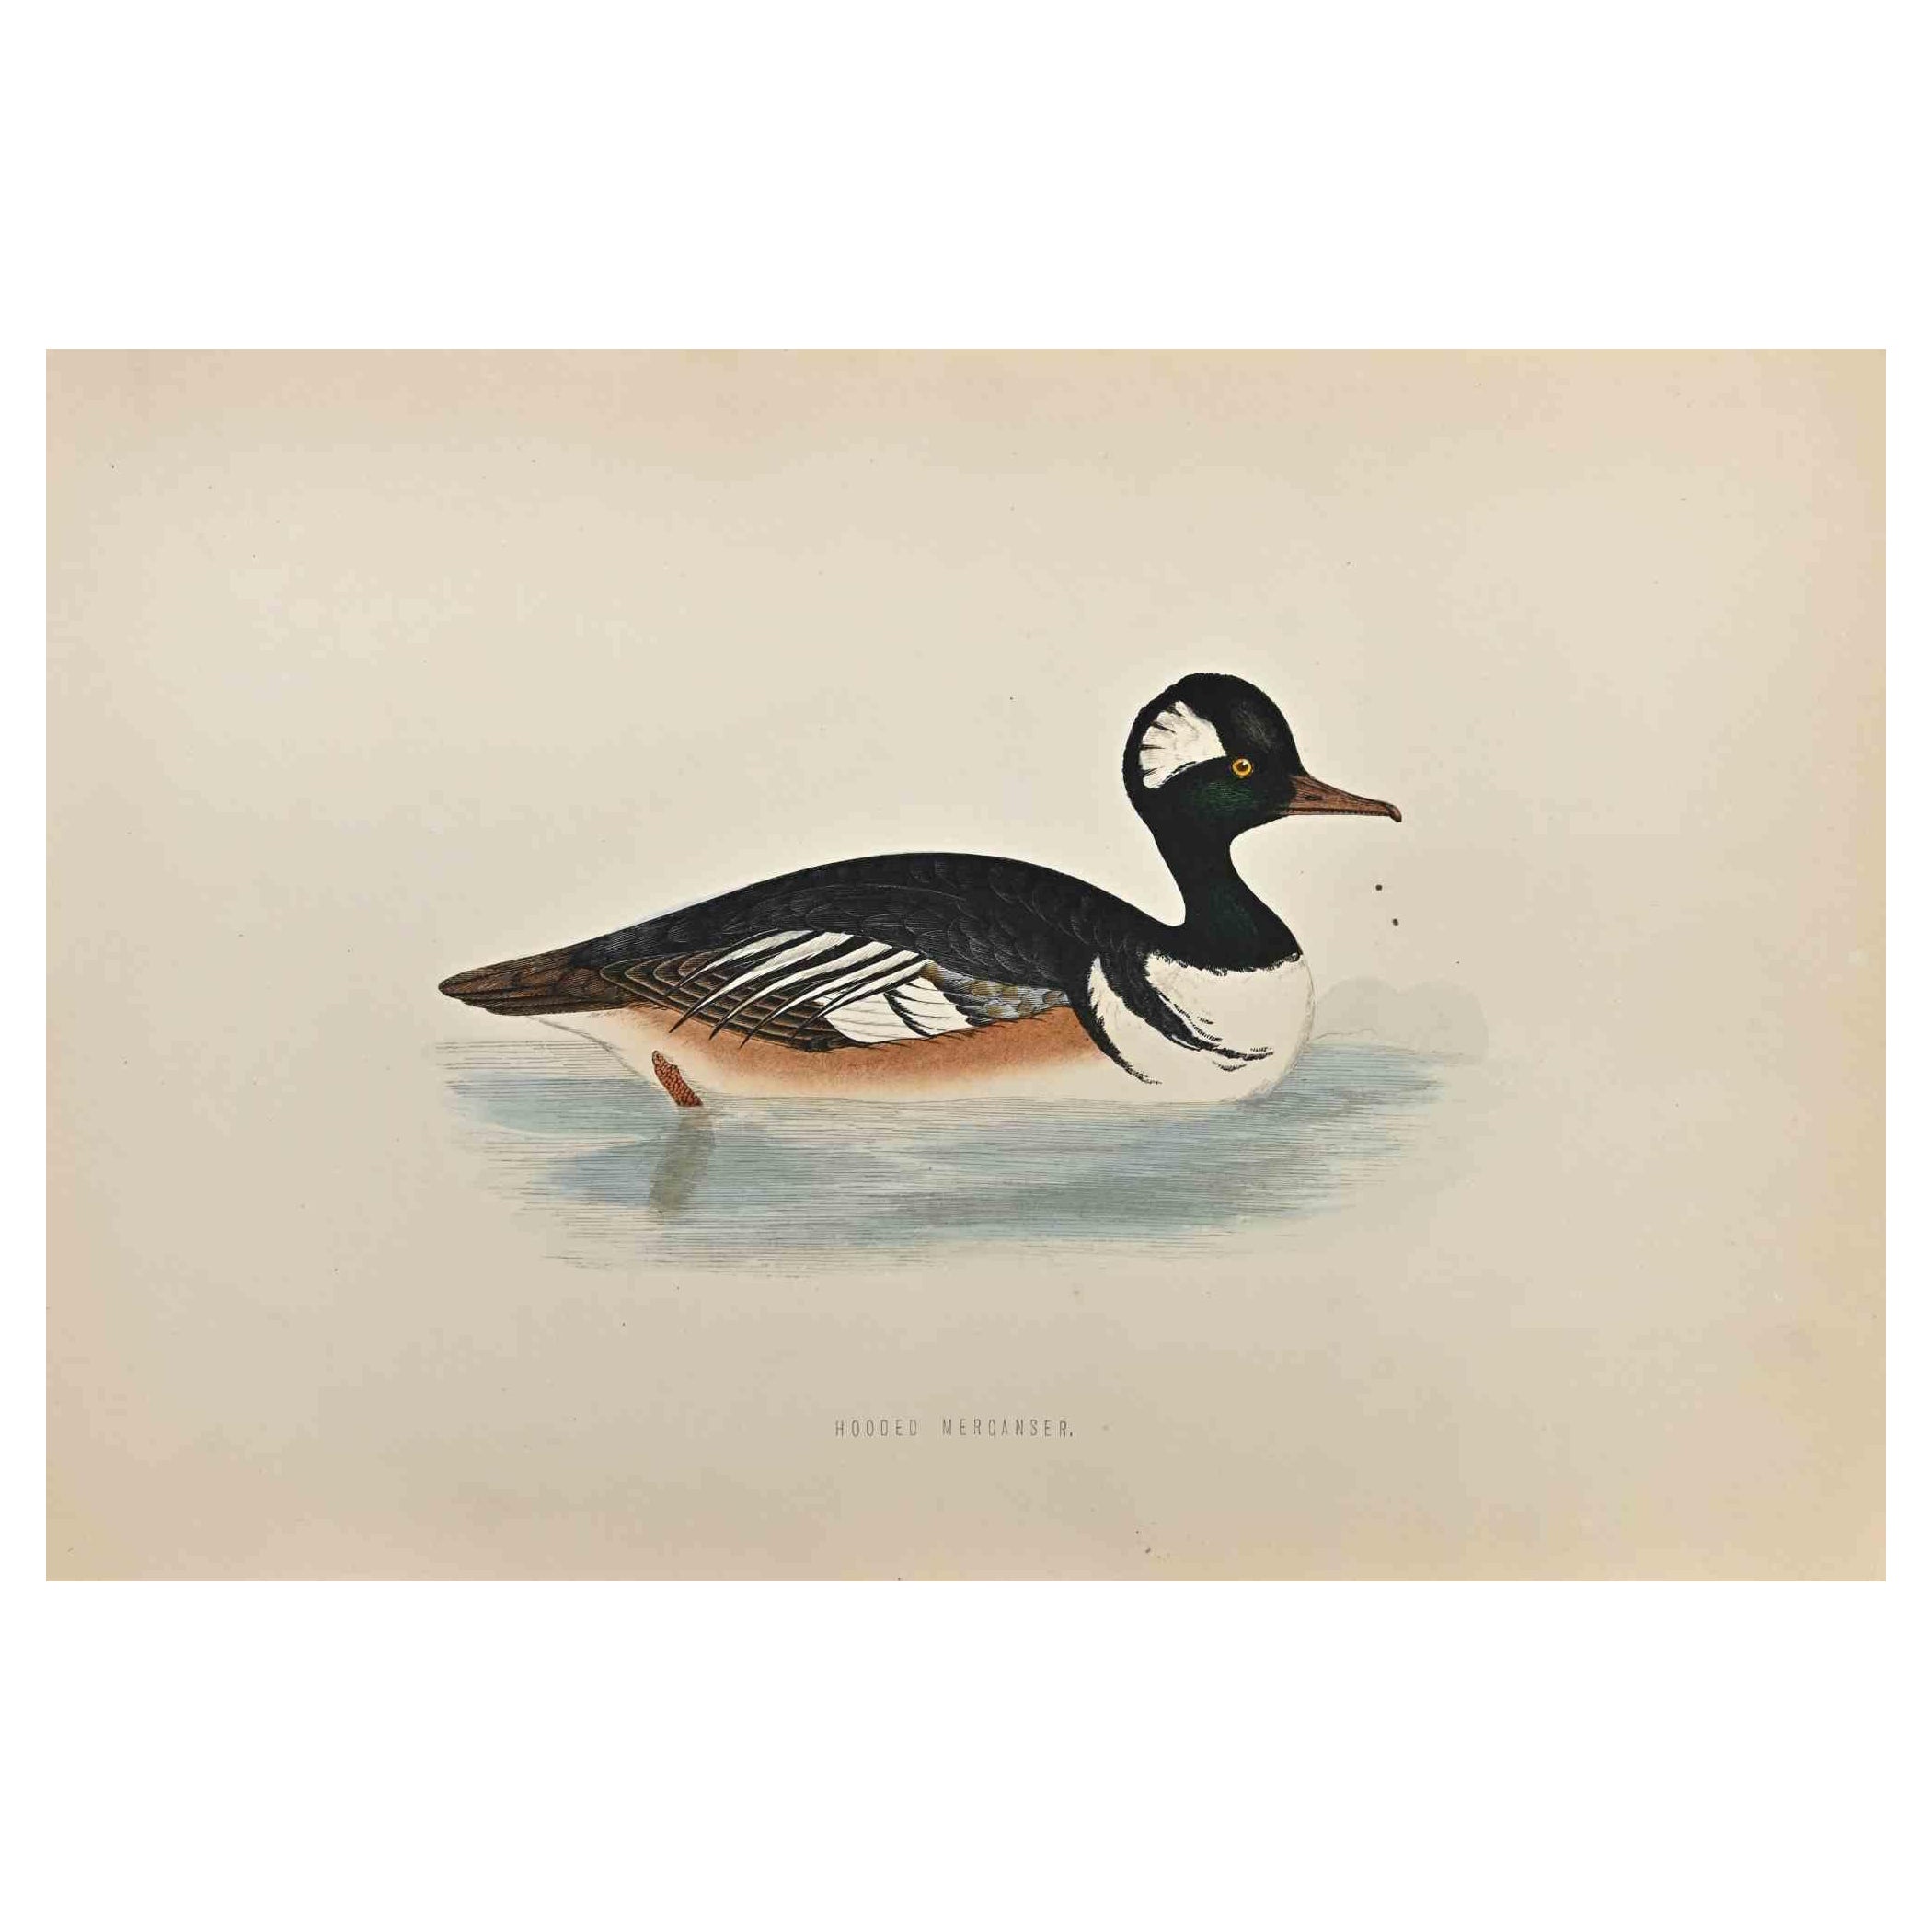 Hooded Merganser  is a modern artwork realized in 1870 by the British artist Alexander Francis Lydon (1836-1917) . 

Woodcut print, hand colored, published by London, Bell & Sons, 1870.  Name of the bird printed in plate. This work is part of a